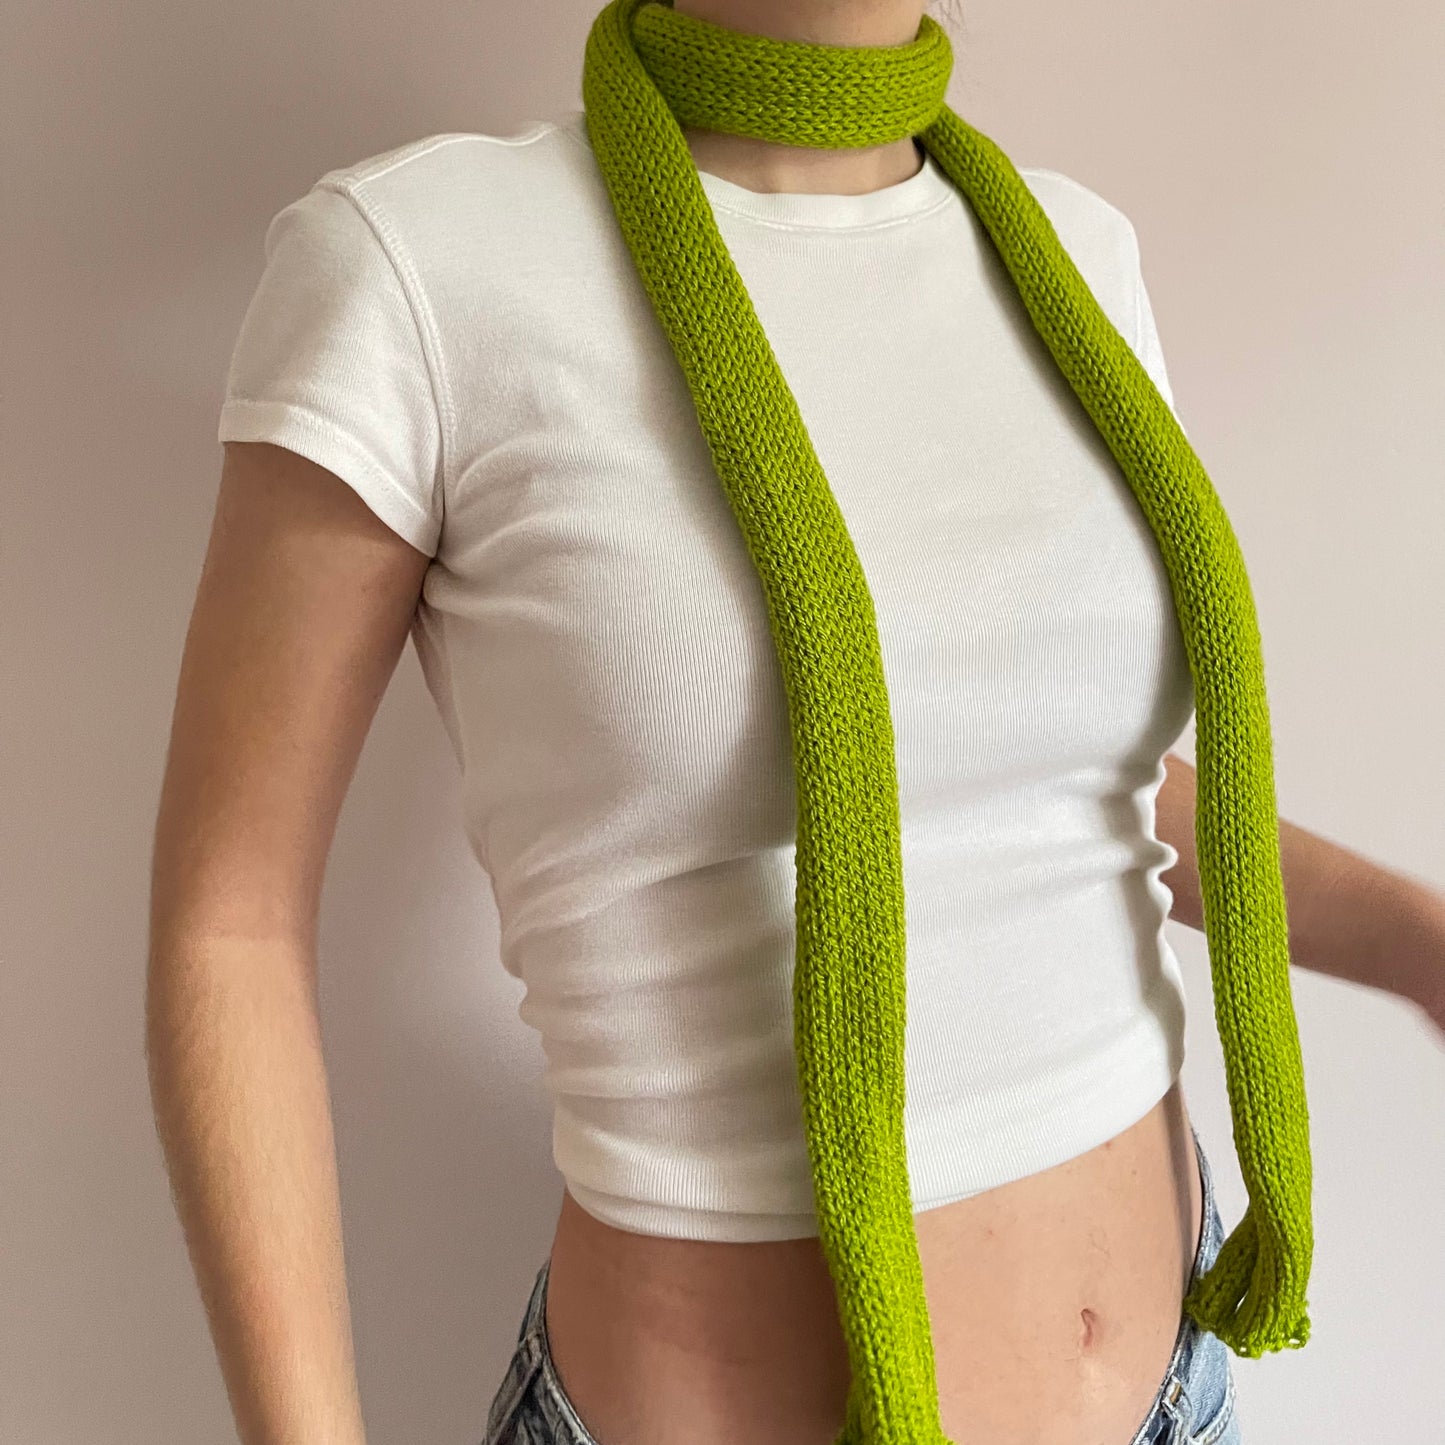 Handmade knitted skinny scarf in olive green